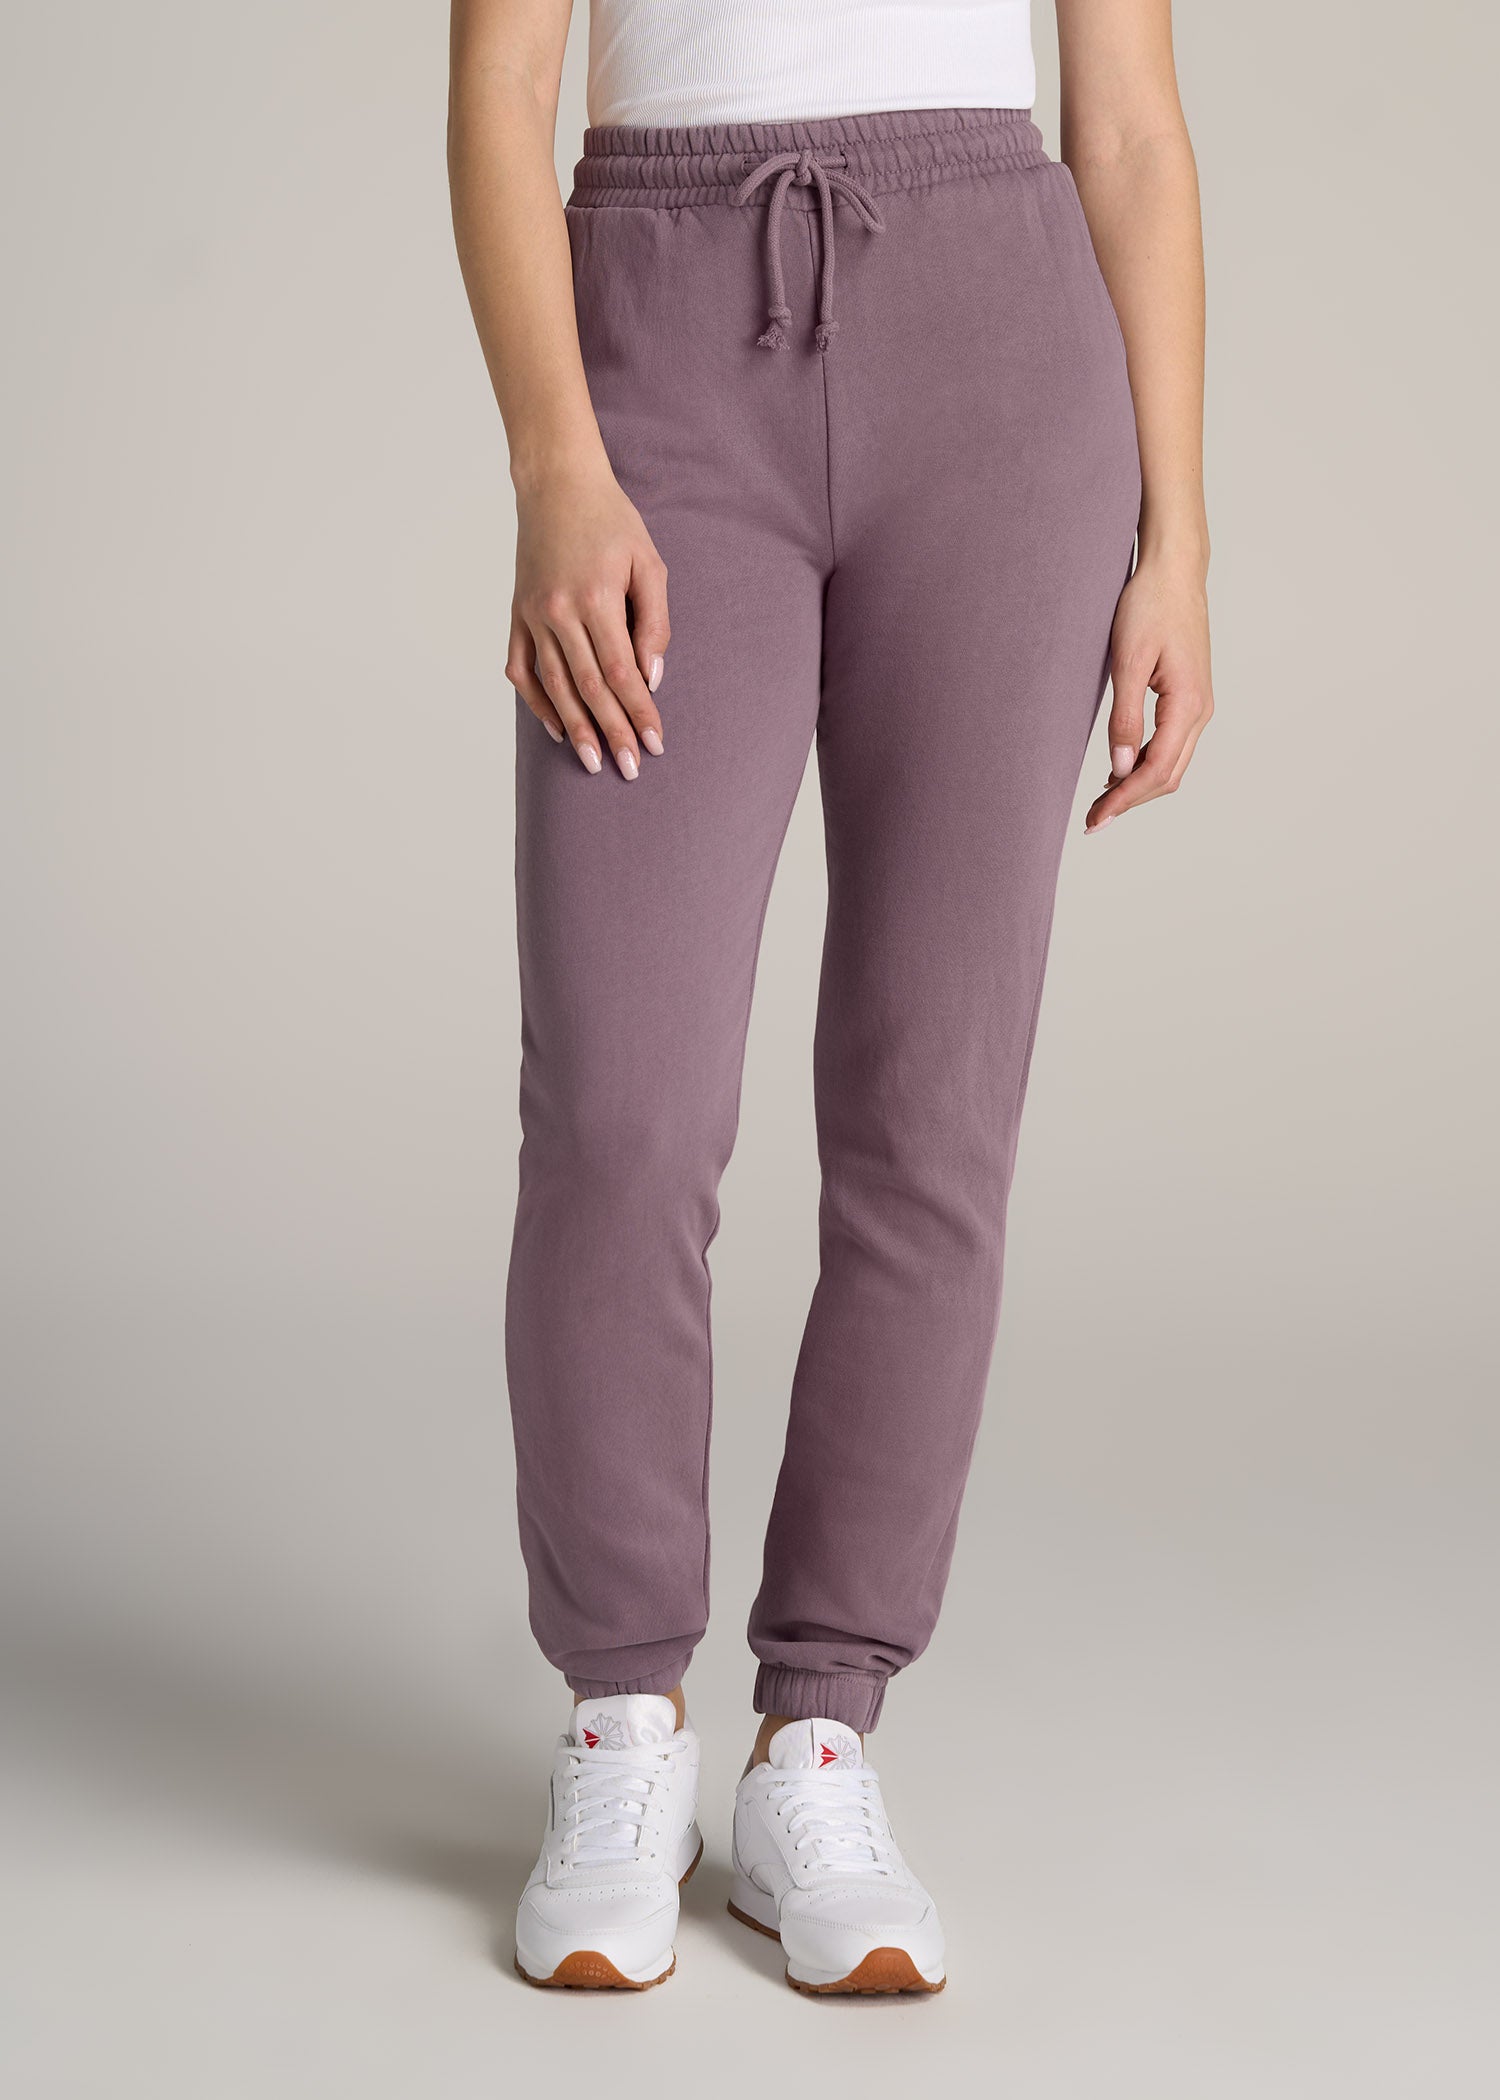 Women's Tall Wearever High-Waisted Garment-Dyed Sweatpants Smoked Mauve –  American Tall